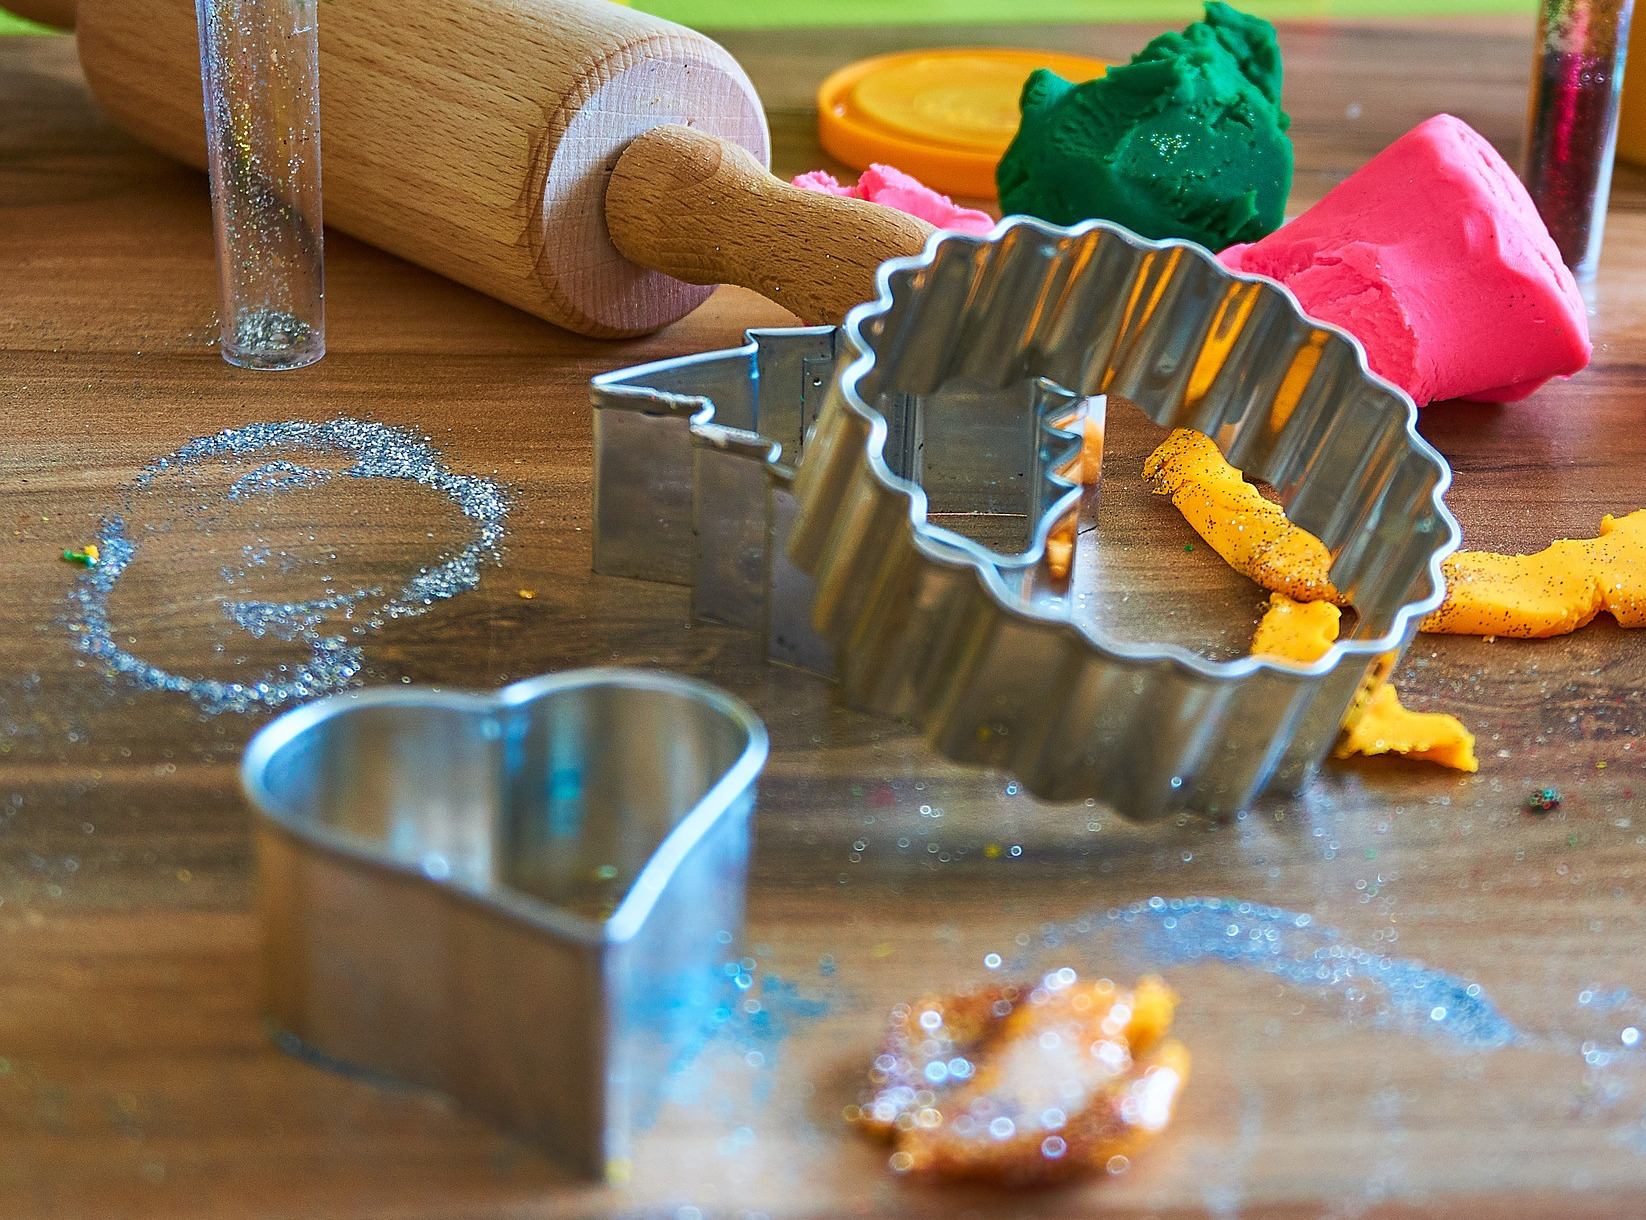 Cookie cutters, rolling pin, glitter, and homemade play dough